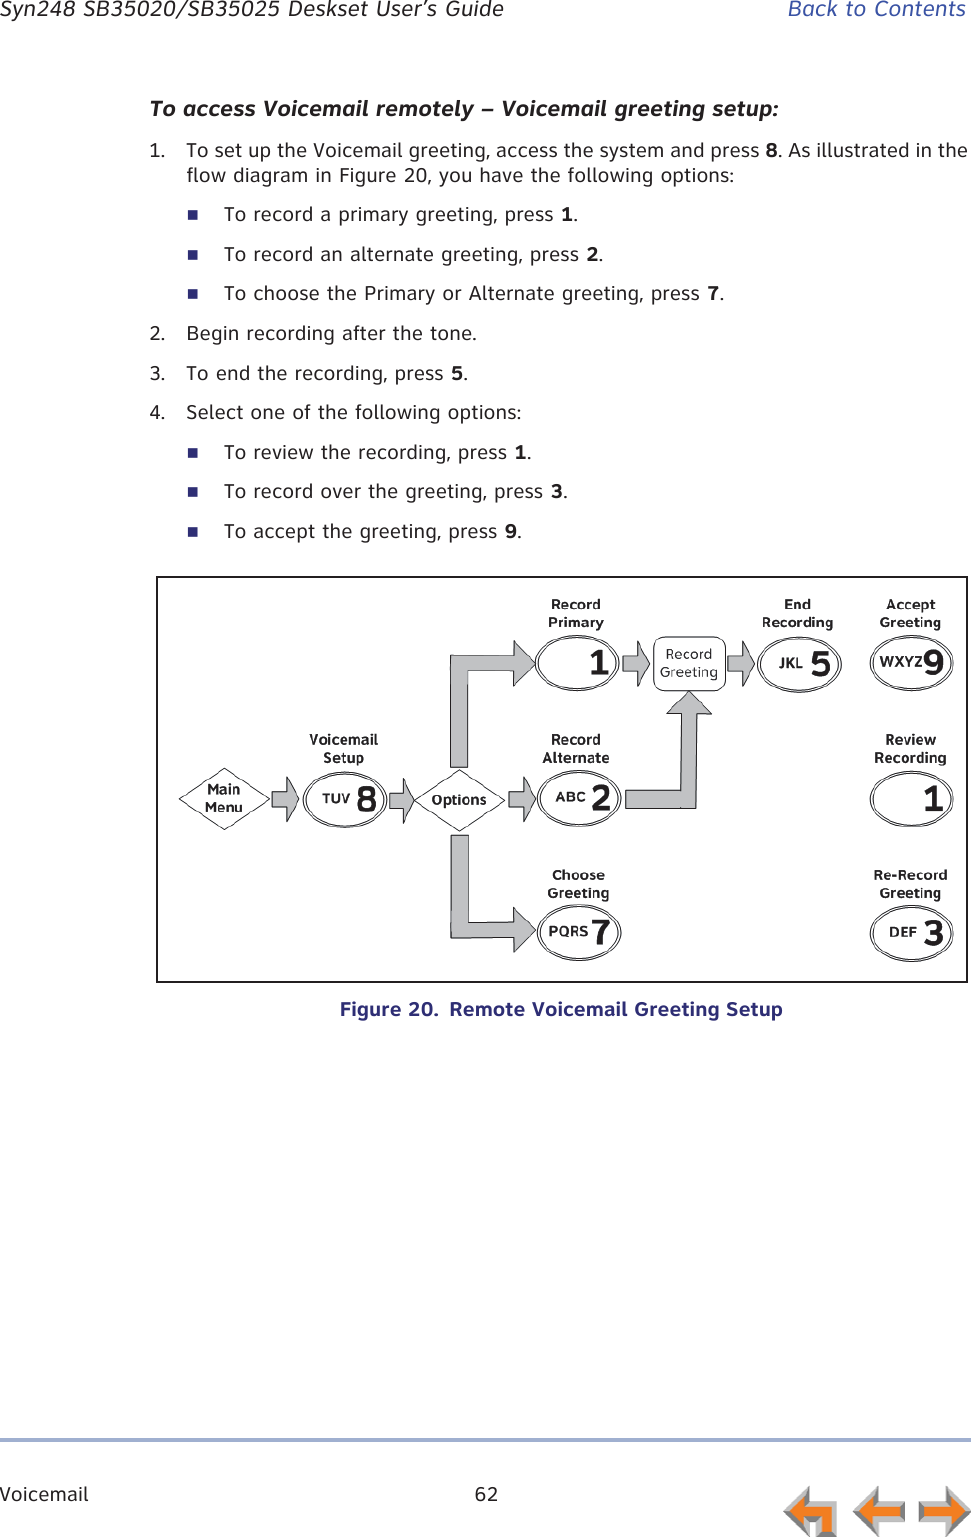 Voicemail 62      Syn248 SB35020/SB35025 Deskset User’s Guide Back to ContentsTo access Voicemail remotely – Voicemail greeting setup:1. To set up the Voicemail greeting, access the system and press 8. As illustrated in the flow diagram in Figure 20, you have the following options:To record a primary greeting, press 1.To record an alternate greeting, press 2.To choose the Primary or Alternate greeting, press 7.2. Begin recording after the tone.3. To end the recording, press 5.4. Select one of the following options:To review the recording, press 1.To record over the greeting, press 3.To accept the greeting, press 9.Figure 20.  Remote Voicemail Greeting Setup